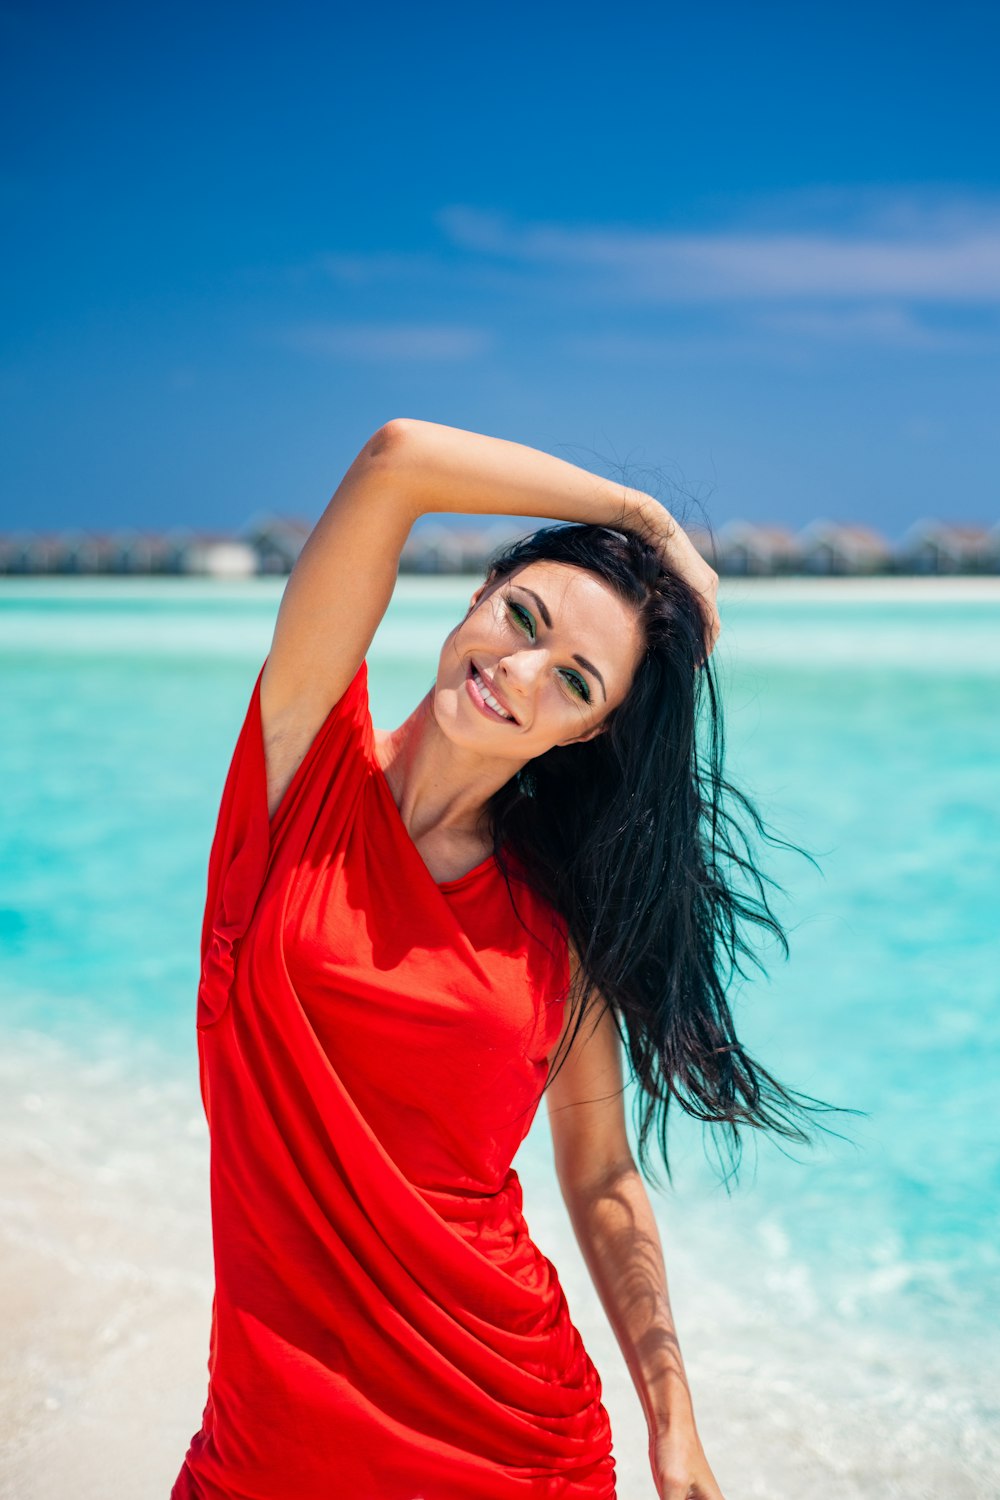 woman in red shirt standing on beach during daytime